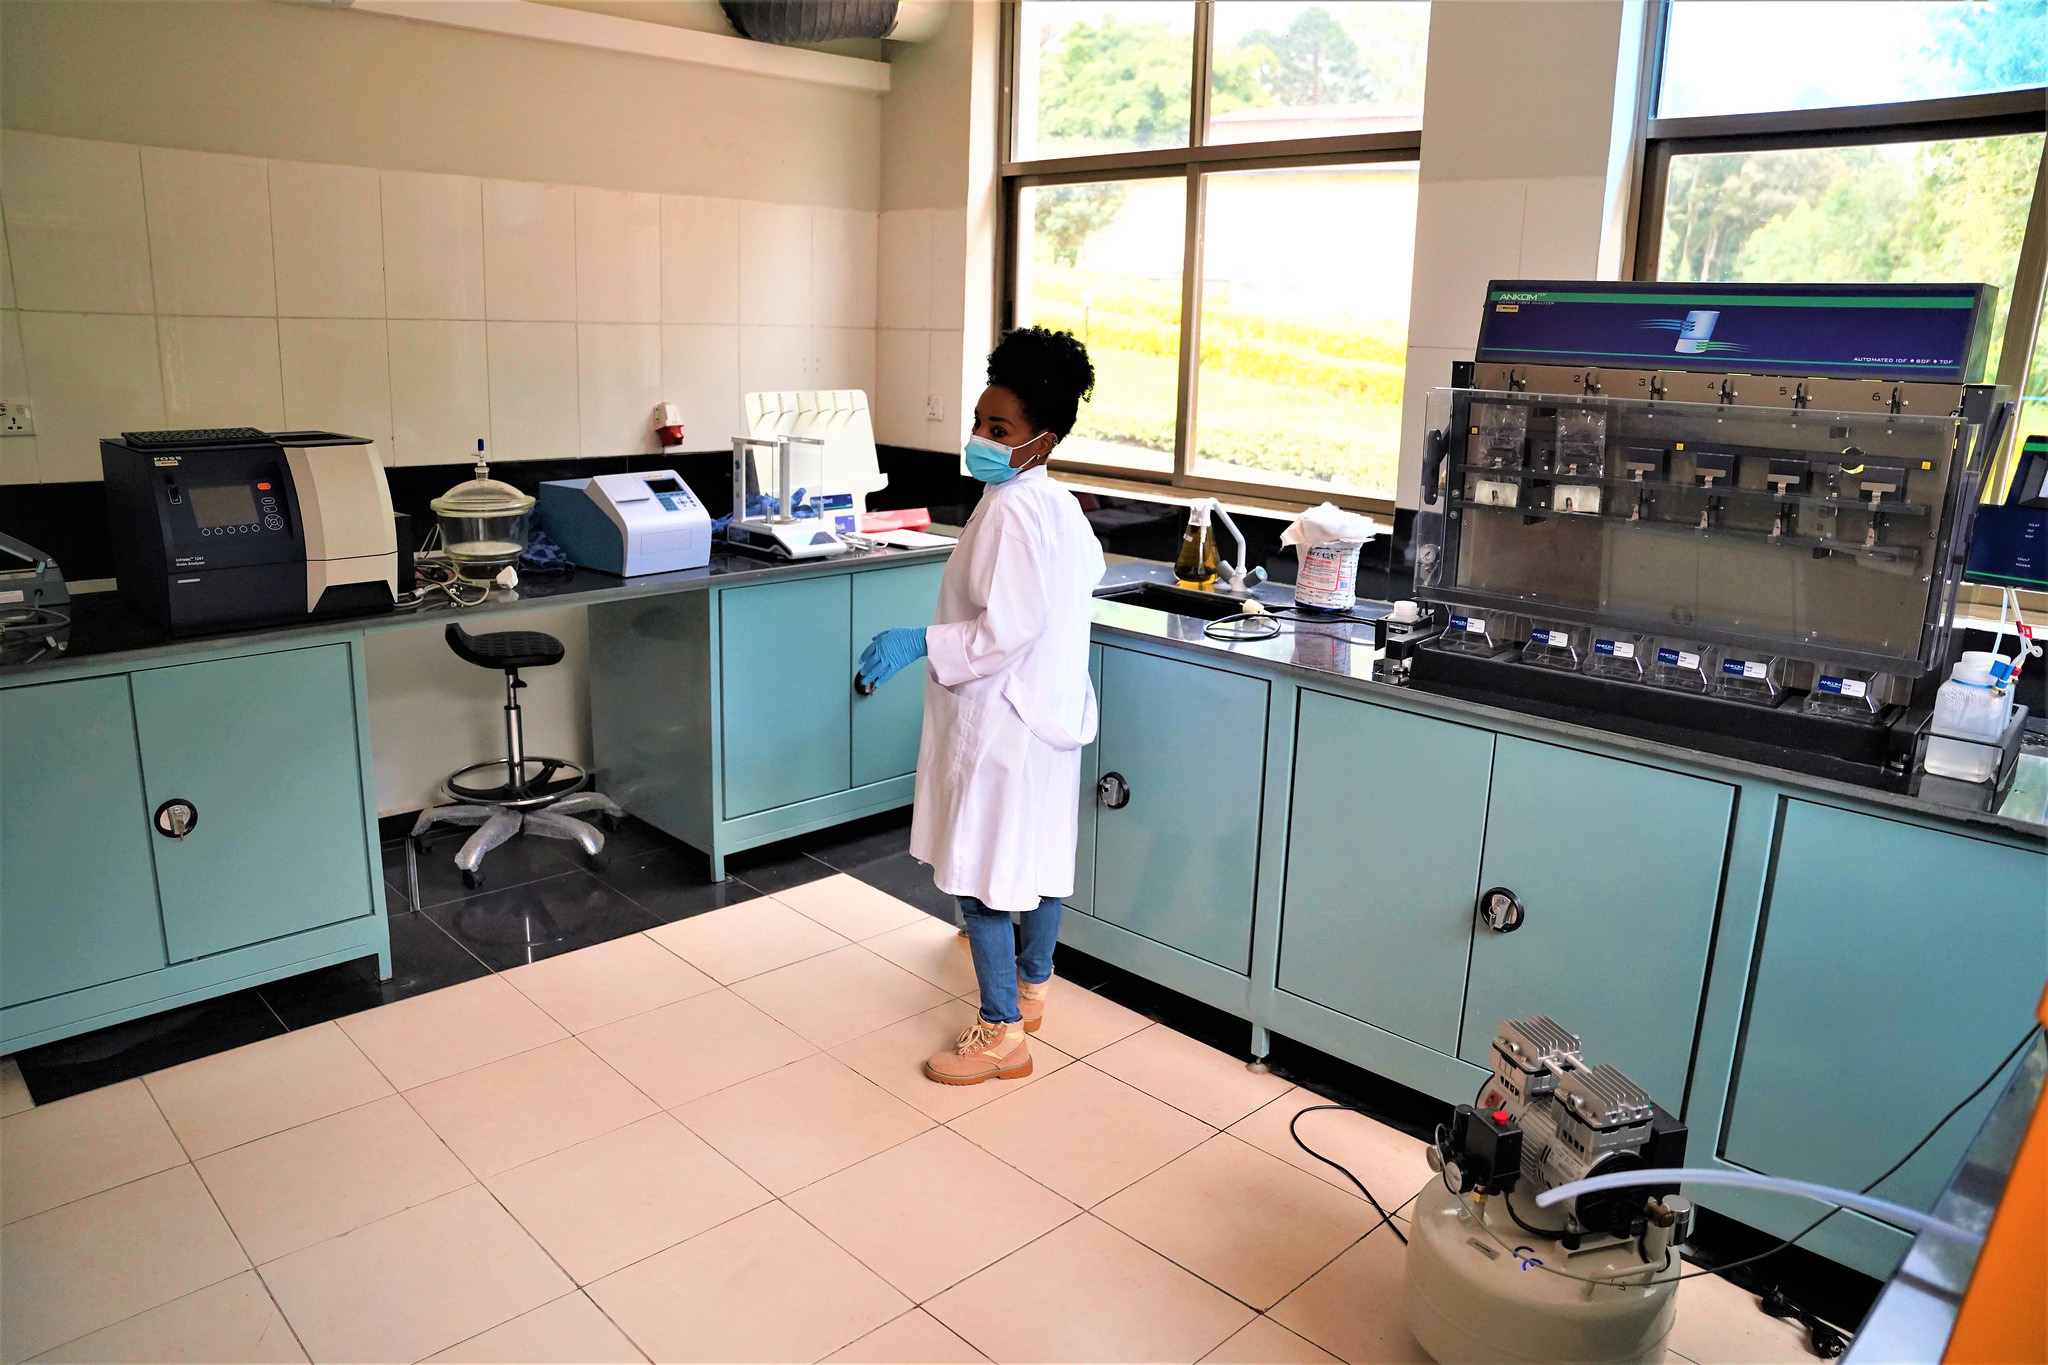 The laboratory has different equipment, including microbiology equipment to help produce starter cultures, equipment that test ingredients and quality of agro-processing products. The research centre is also a medicinal garden, with herb species used in producing pharmaceutical products. Photo: Craish Bahizi.